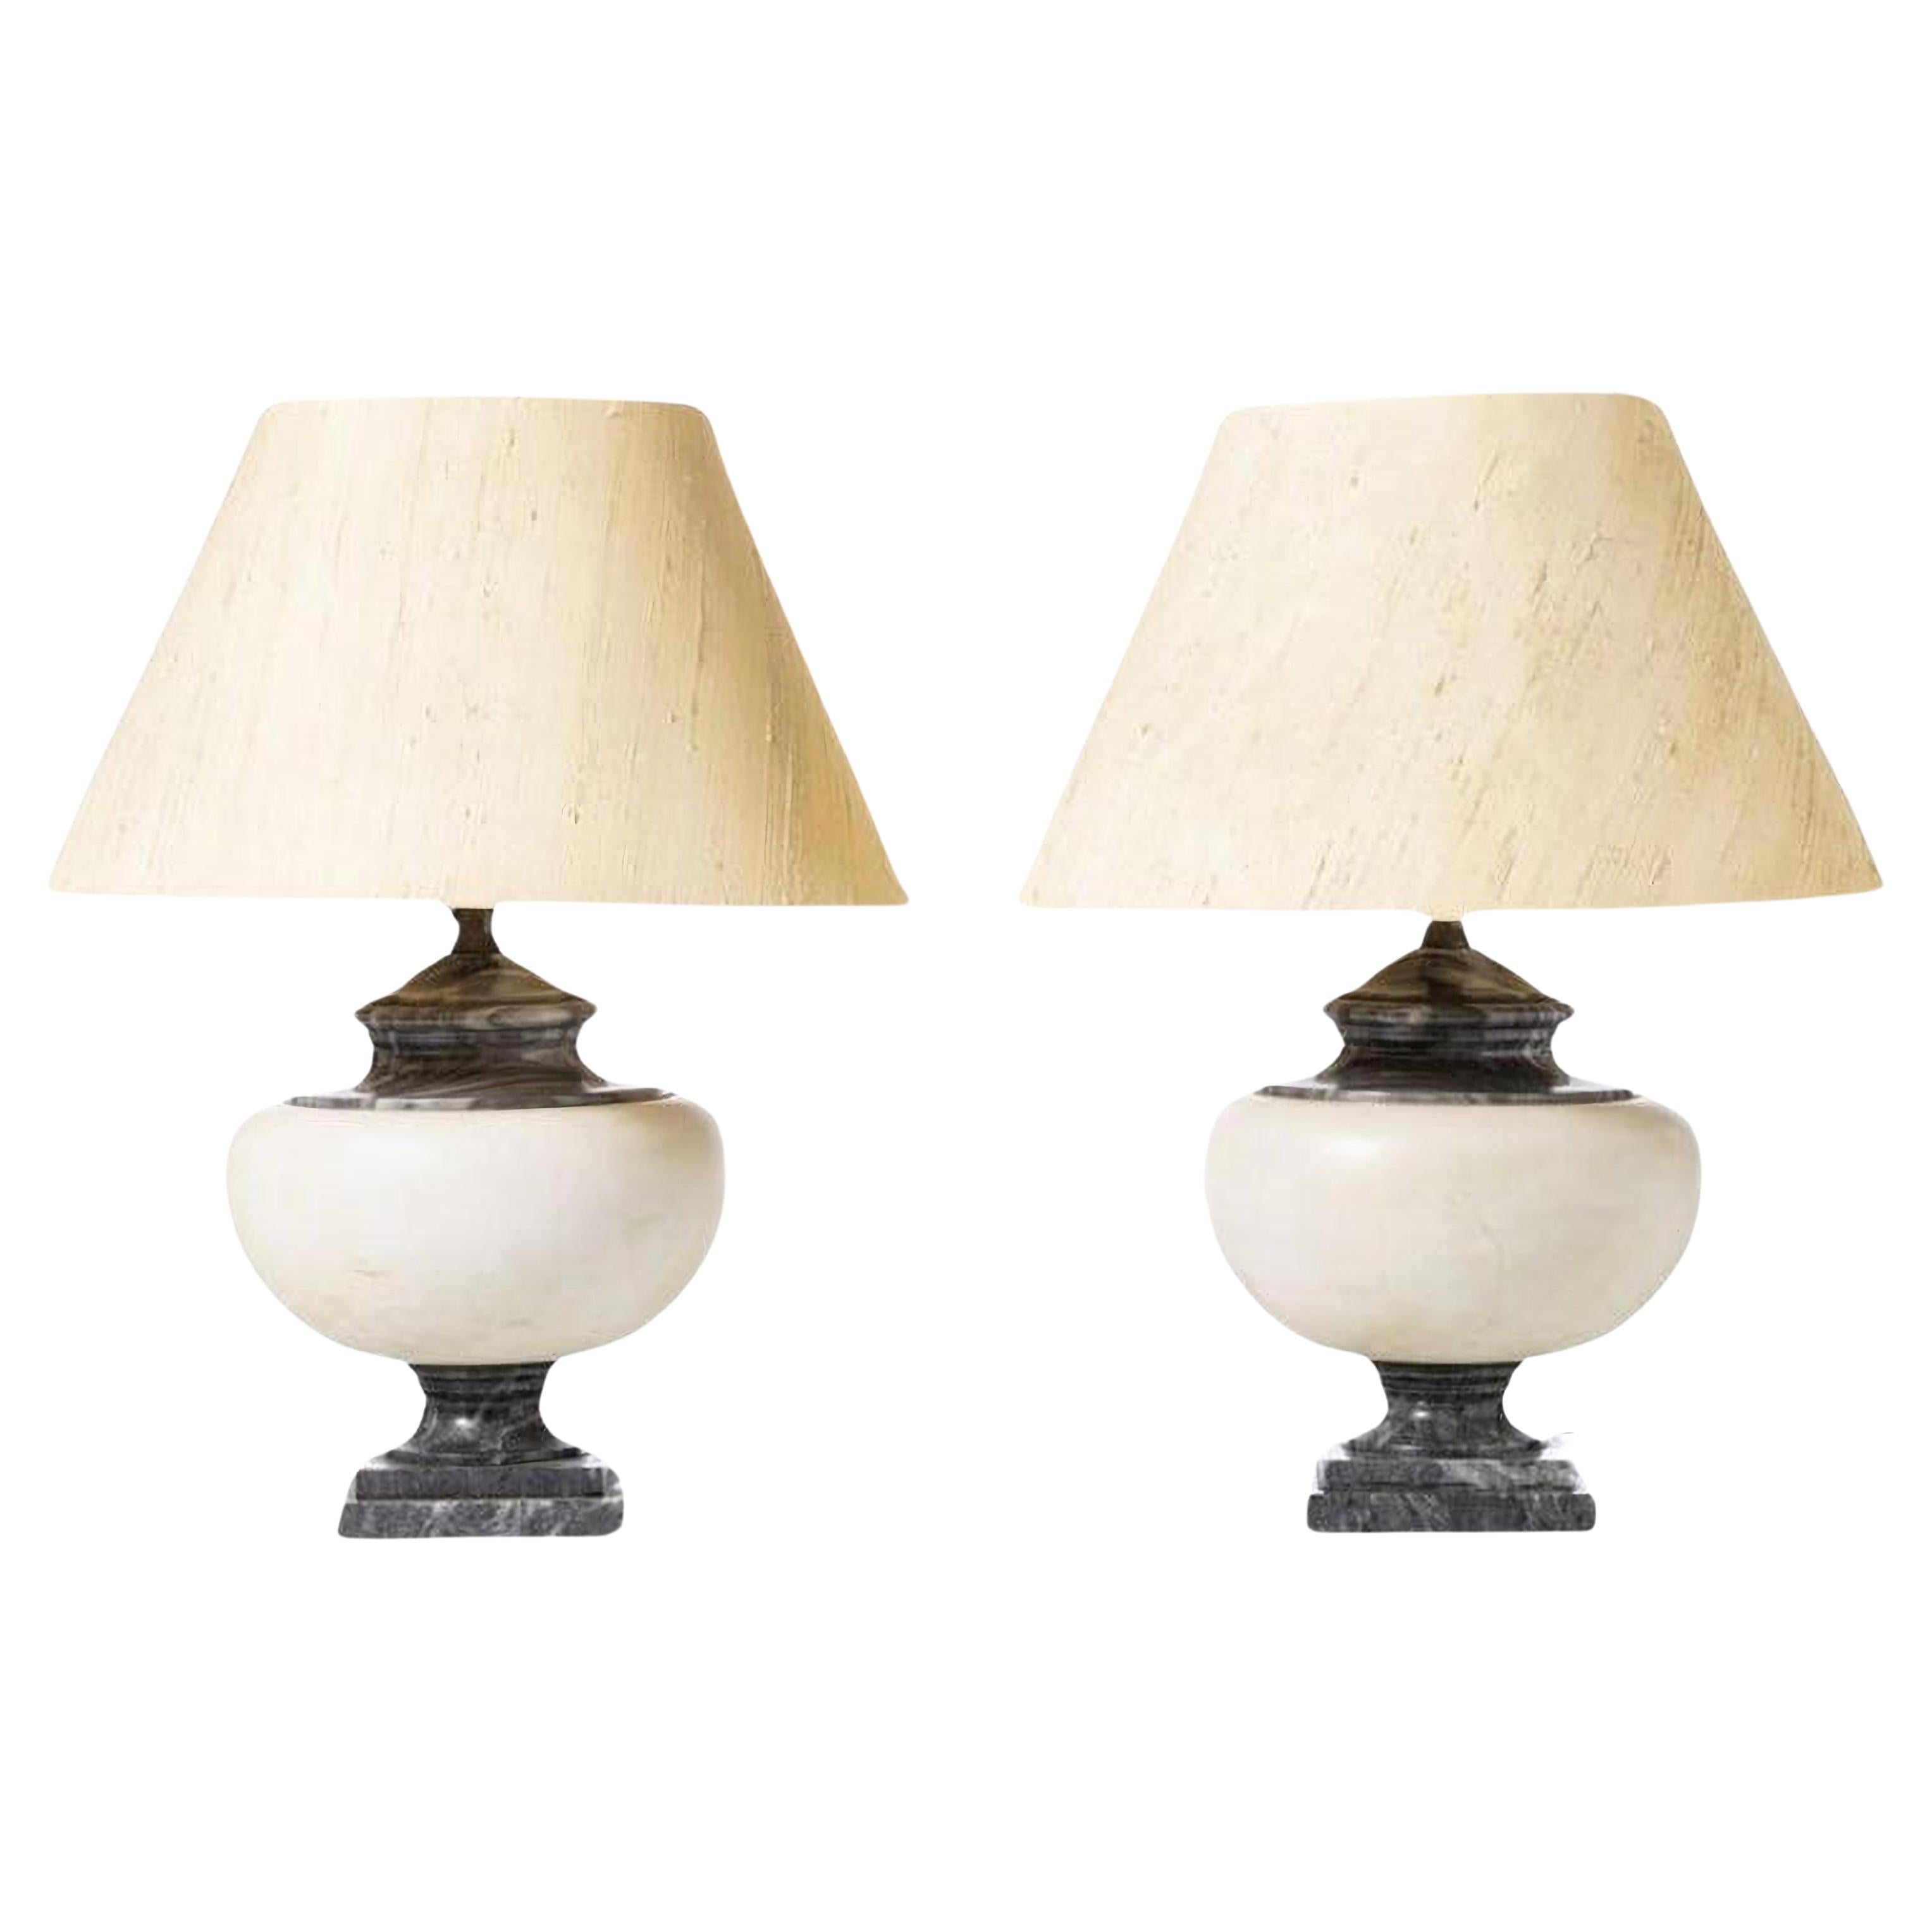 Pair of Art Deco Early 20th Century Italian Lamps For Sale